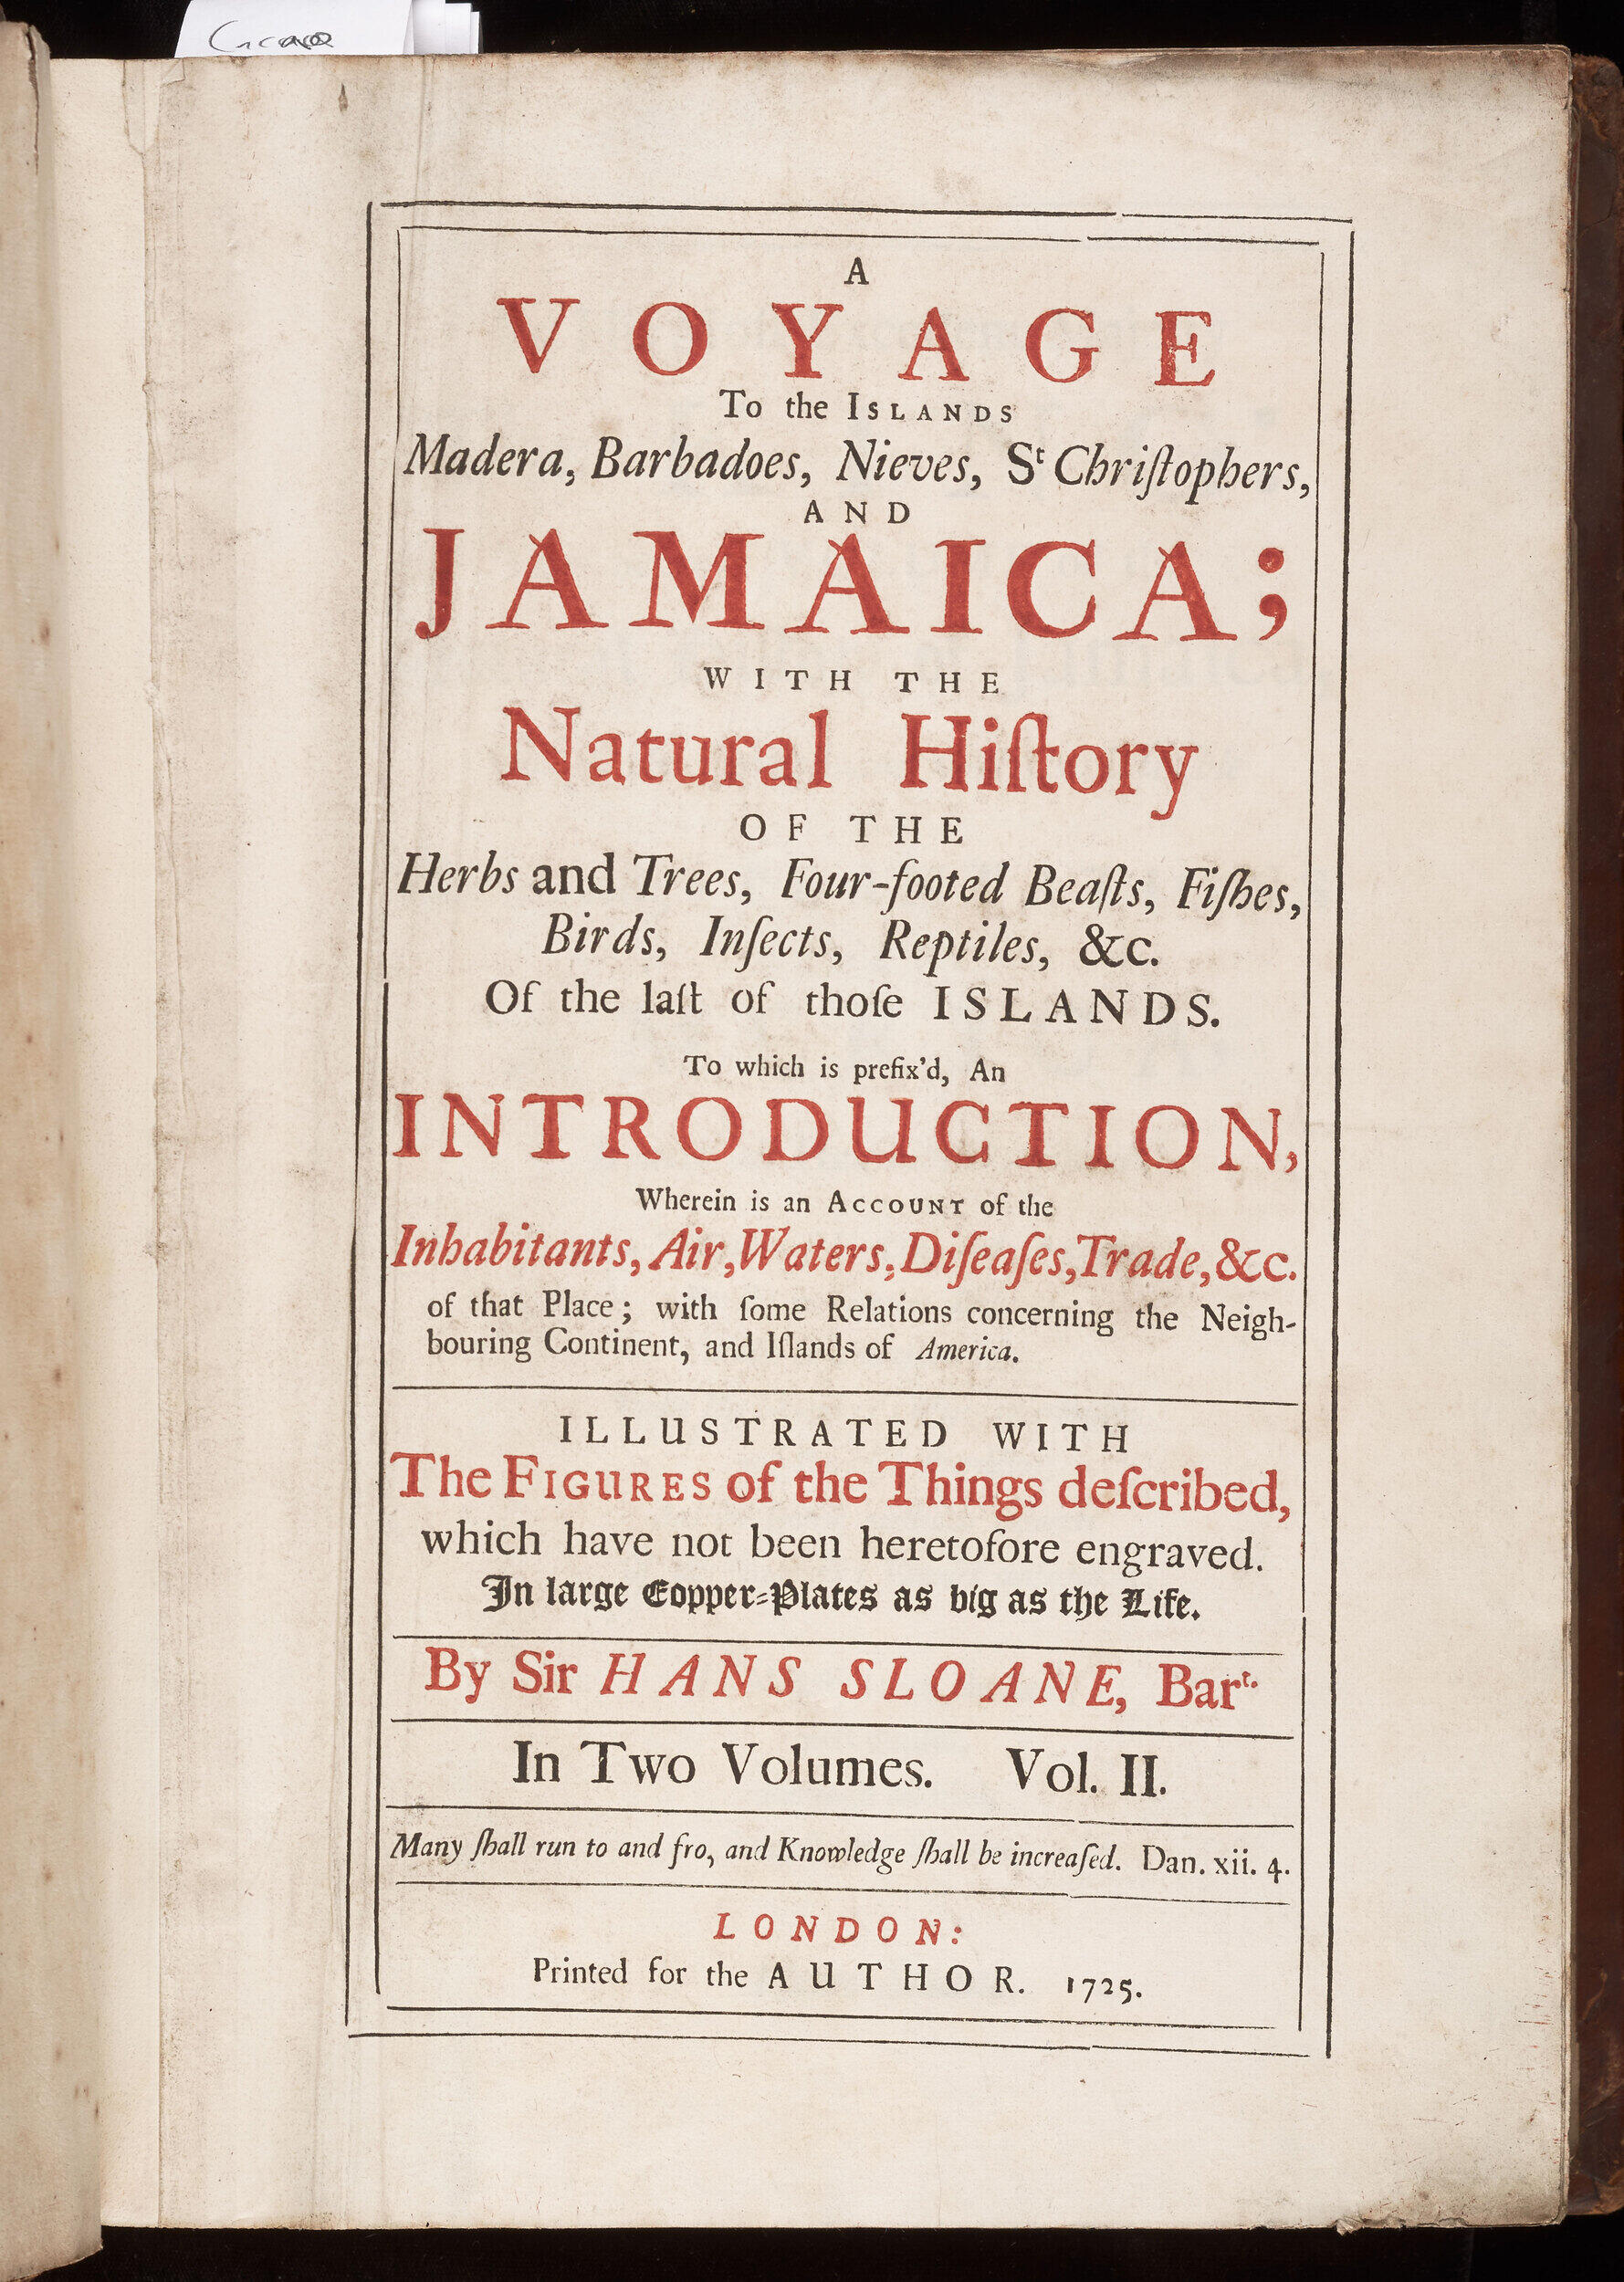 A page of music reading "A voyage to the islands Madera, Barbadoes, Nieves, St. Christophers, and Jamaica; with the natural history of the herbs and trees, four-footed beasts, fishes, birds, insects, reptiles & c of the last of those islands.

To which is prefix'd an introduction, wherein is an account of the inhabitants, air, waters, diseases, trade & c. of that place; with some relations concern the neighboring continent, and islands of America; 

Illustrated with the figures of the things described, which have not been heretofore engraved, in large copper-plates as big as the life.

By Sire Hans Sloans, Bar. In two volumes Vol II

London; printed for the author, 1725.